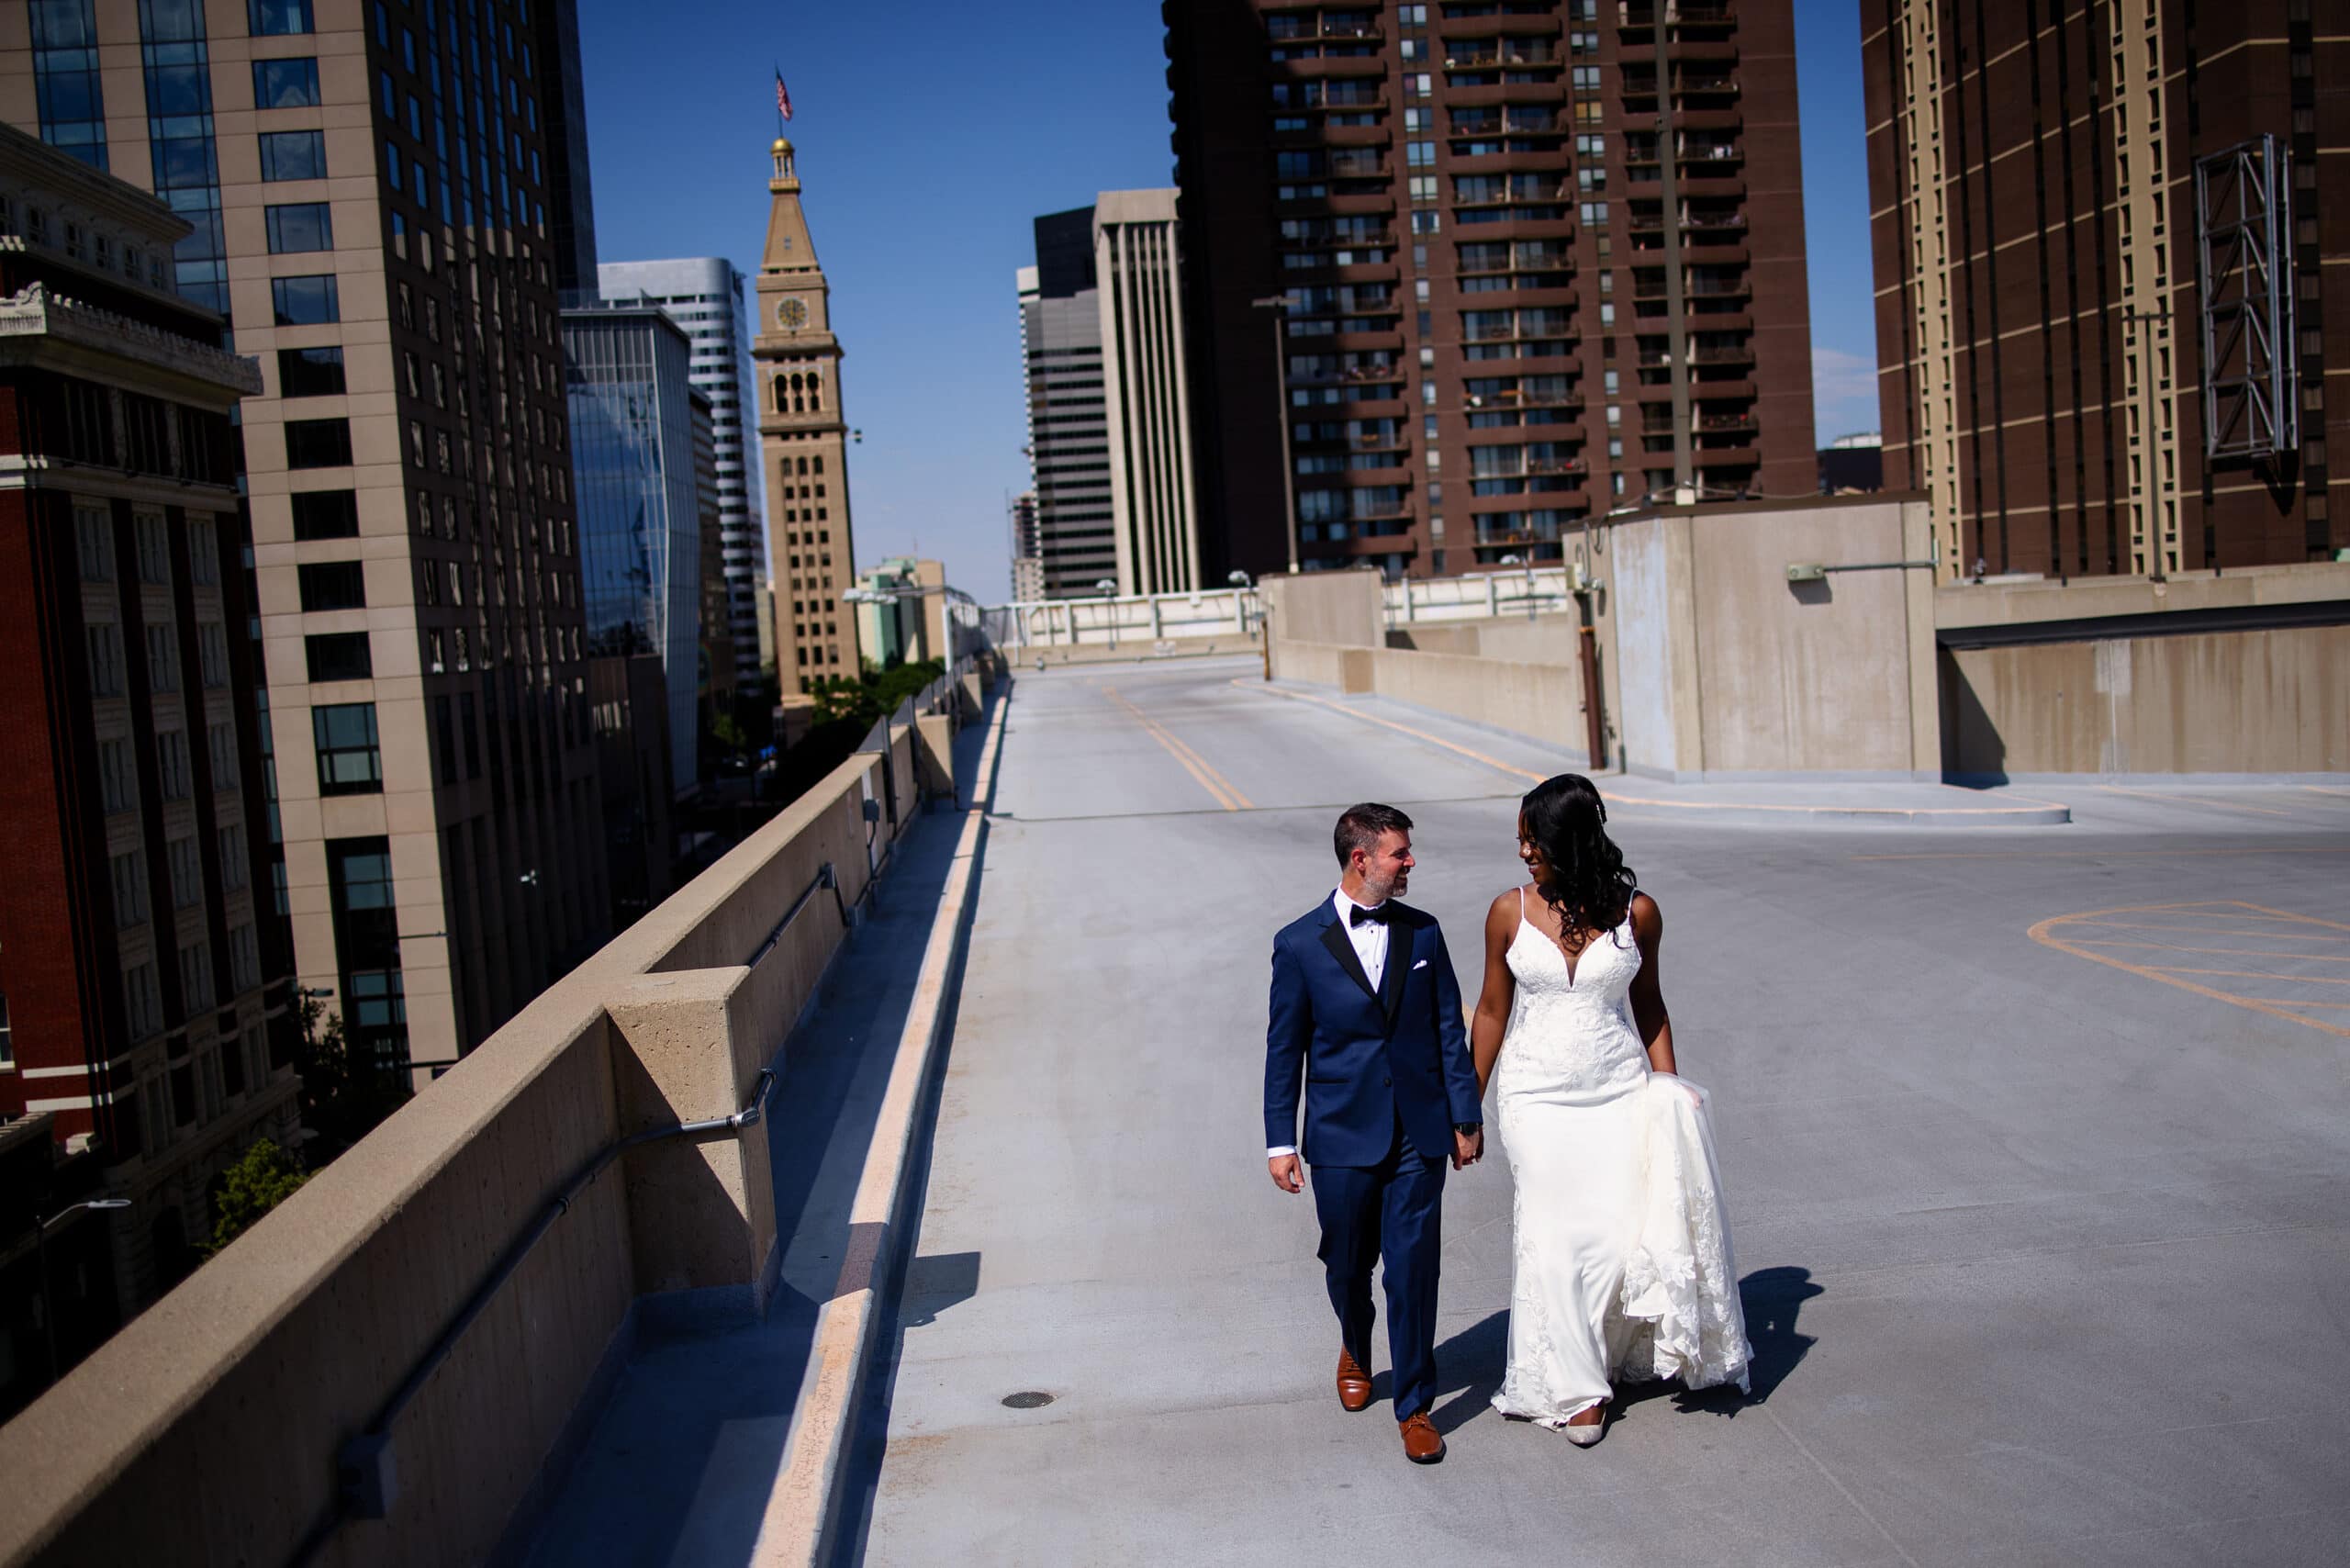 The newlyweds walk on the roof of a parking garage in Denver